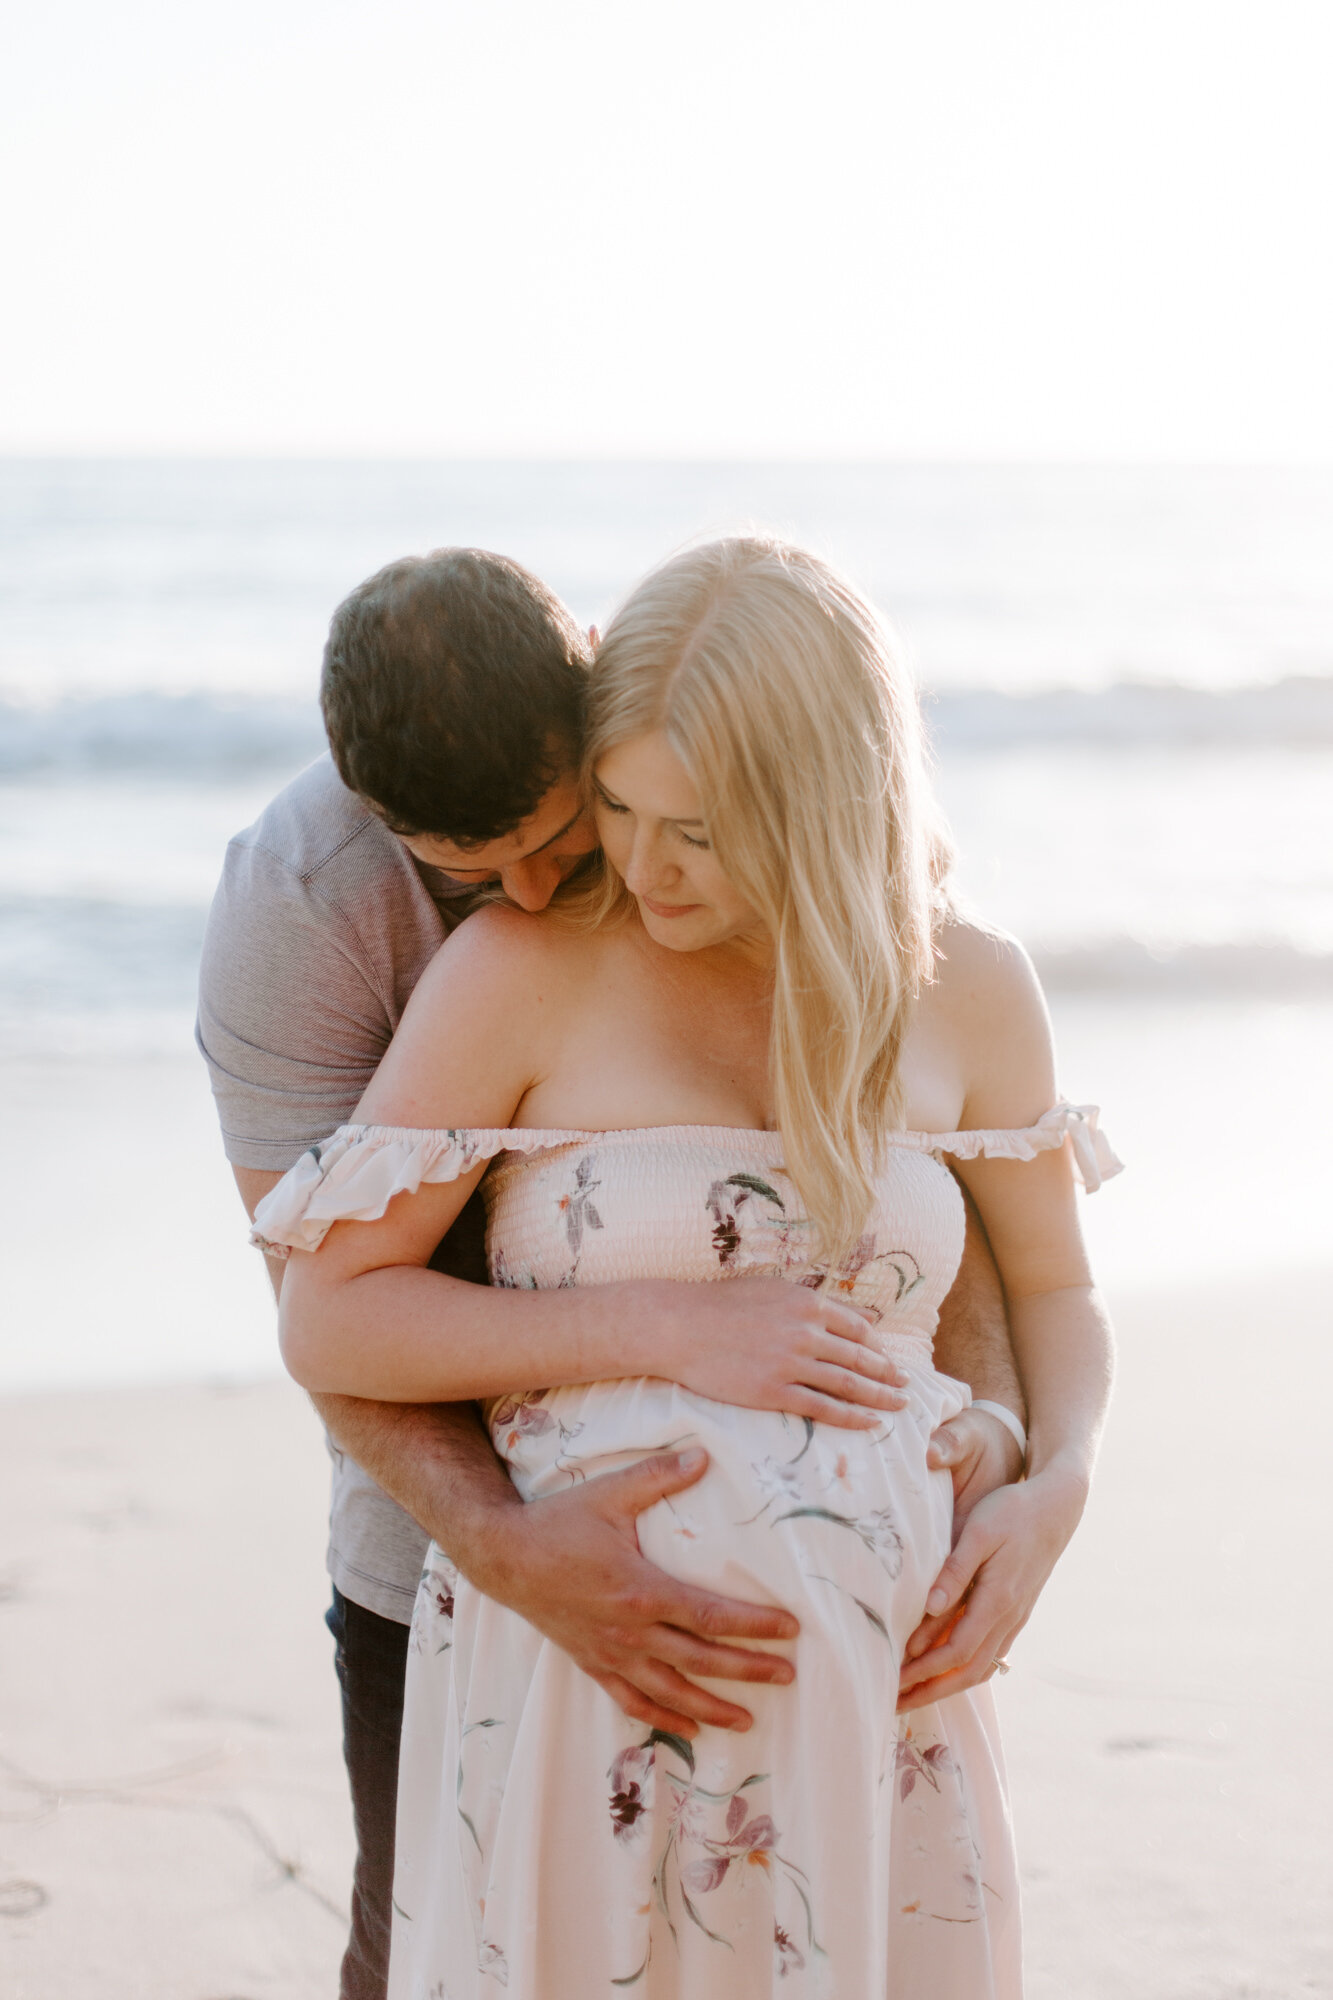 Carlsbad Bluff Maternity and Family Photo Session, San Diego. Family photography and maternity photography. Family photographer and maternity photographer. San Diego family photographer, san diego